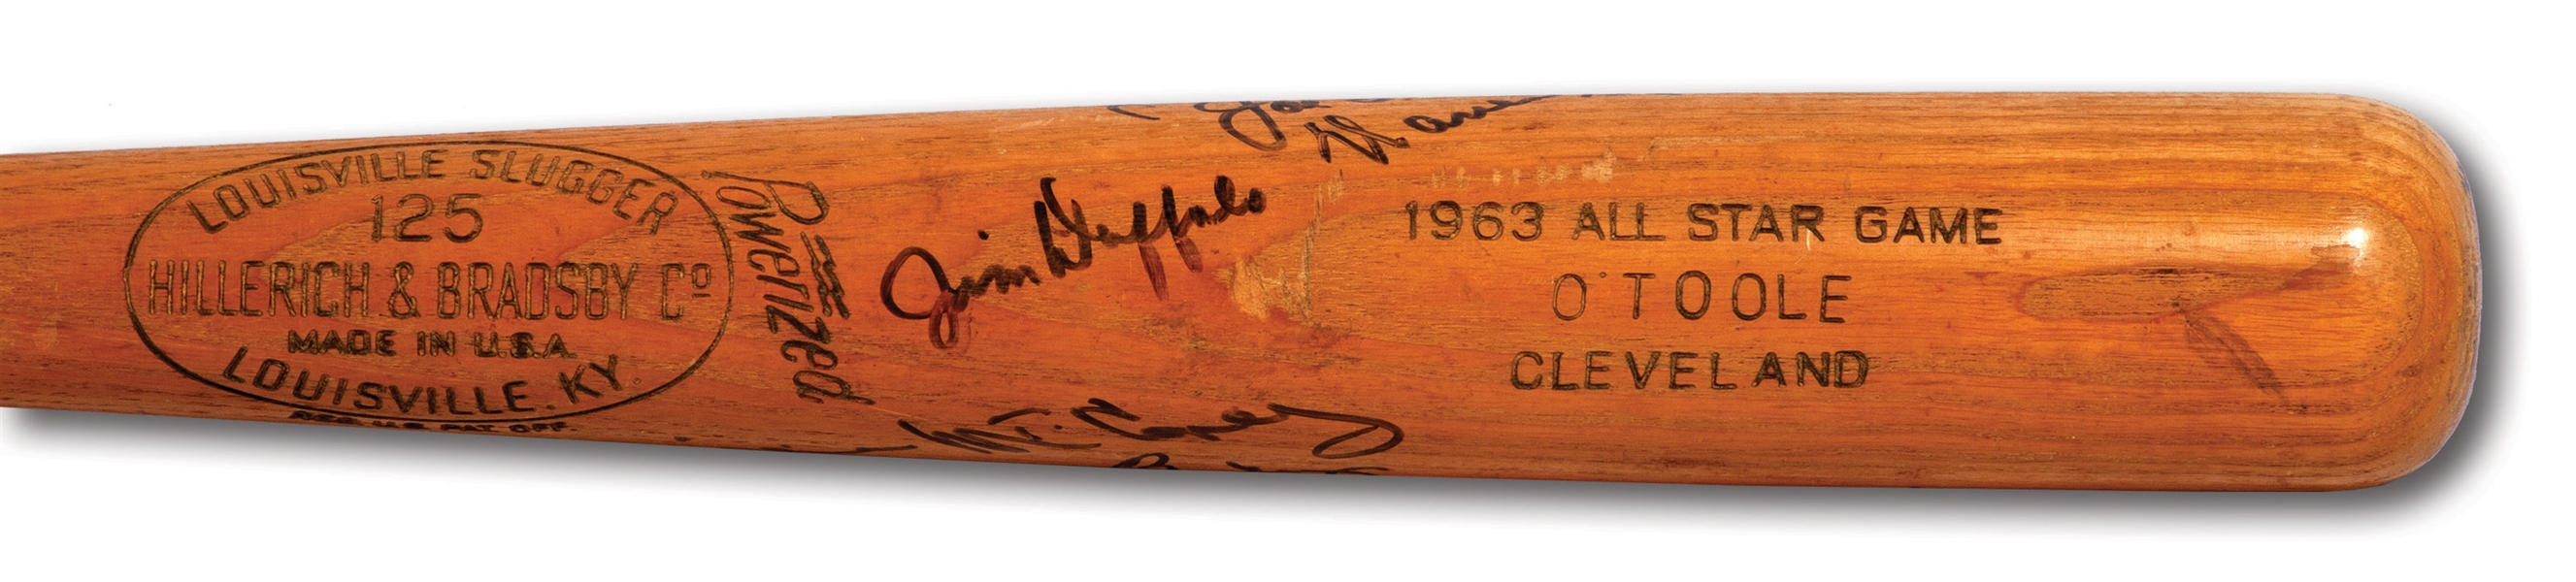 JIM O’TOOLE 1963 ALL-STAR GAME ISSUED BAT SIGNED BY 1963 N.L. ALL-STAR TEAM MEMBERS INCL. CLEMENTE